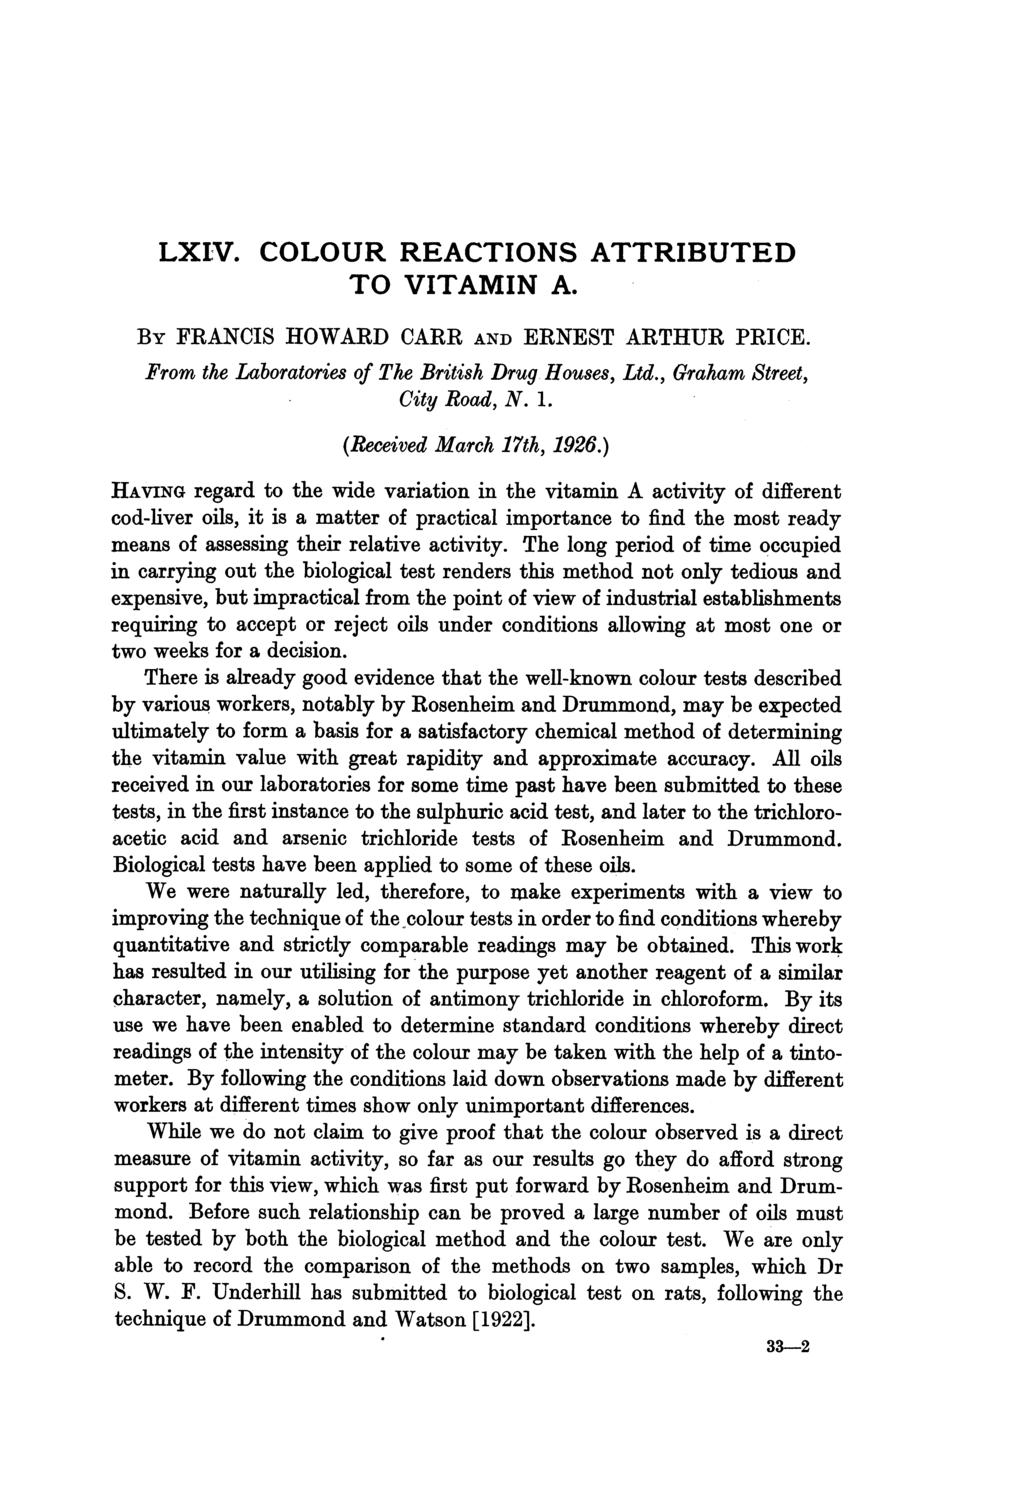 LXIV. COLOUR REACTIONS ATTRIBUTED TO VITAMIN A. BY FRANCIS HOWARD CARR AND ERNEST ARTHUR PRICE. From the Laboratories of The British Drug Houses, Ltd., Graham Street, City Road, N. 1.